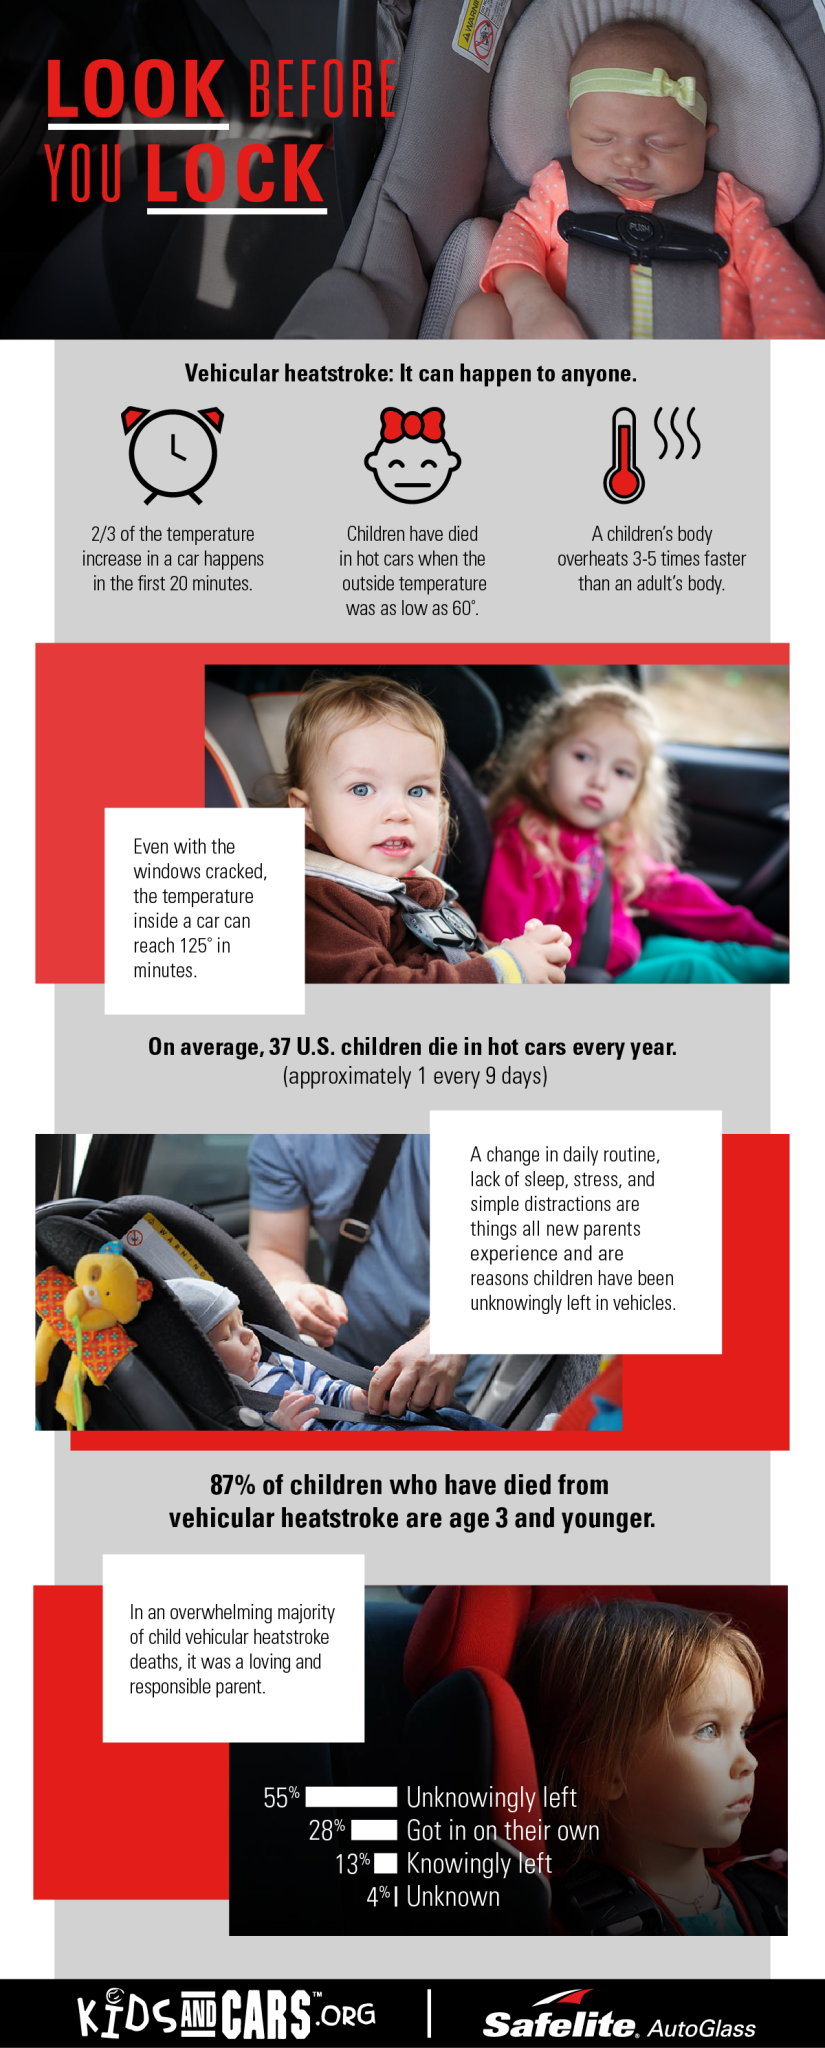 Vehicular heat stroke can end a child's life very quickly on hot summer days. Here are the facts.